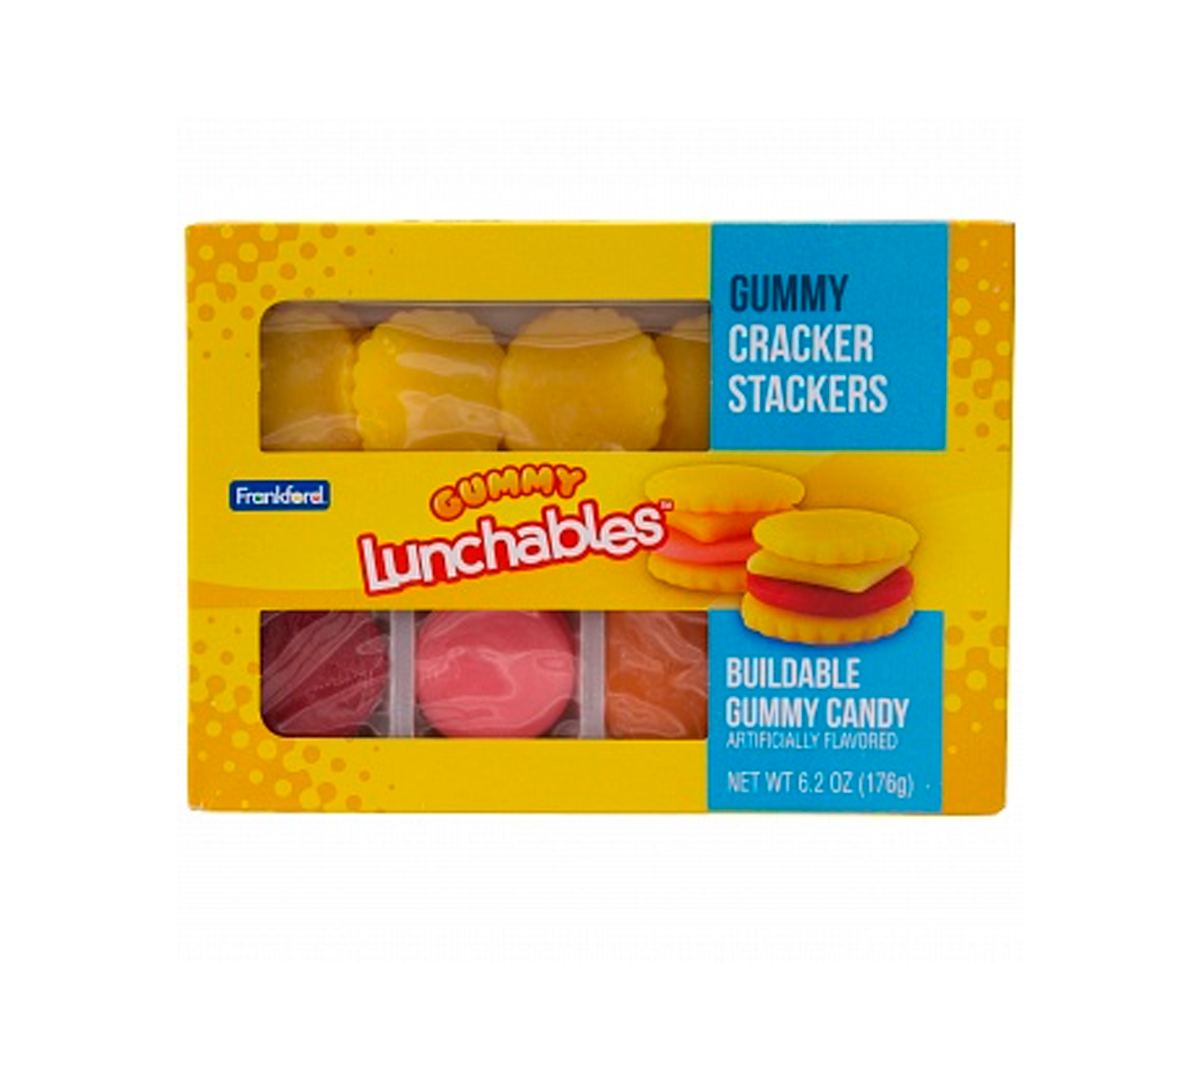 Frankford Gummy Lunchables Cracker Stackers - Caramelle gommose